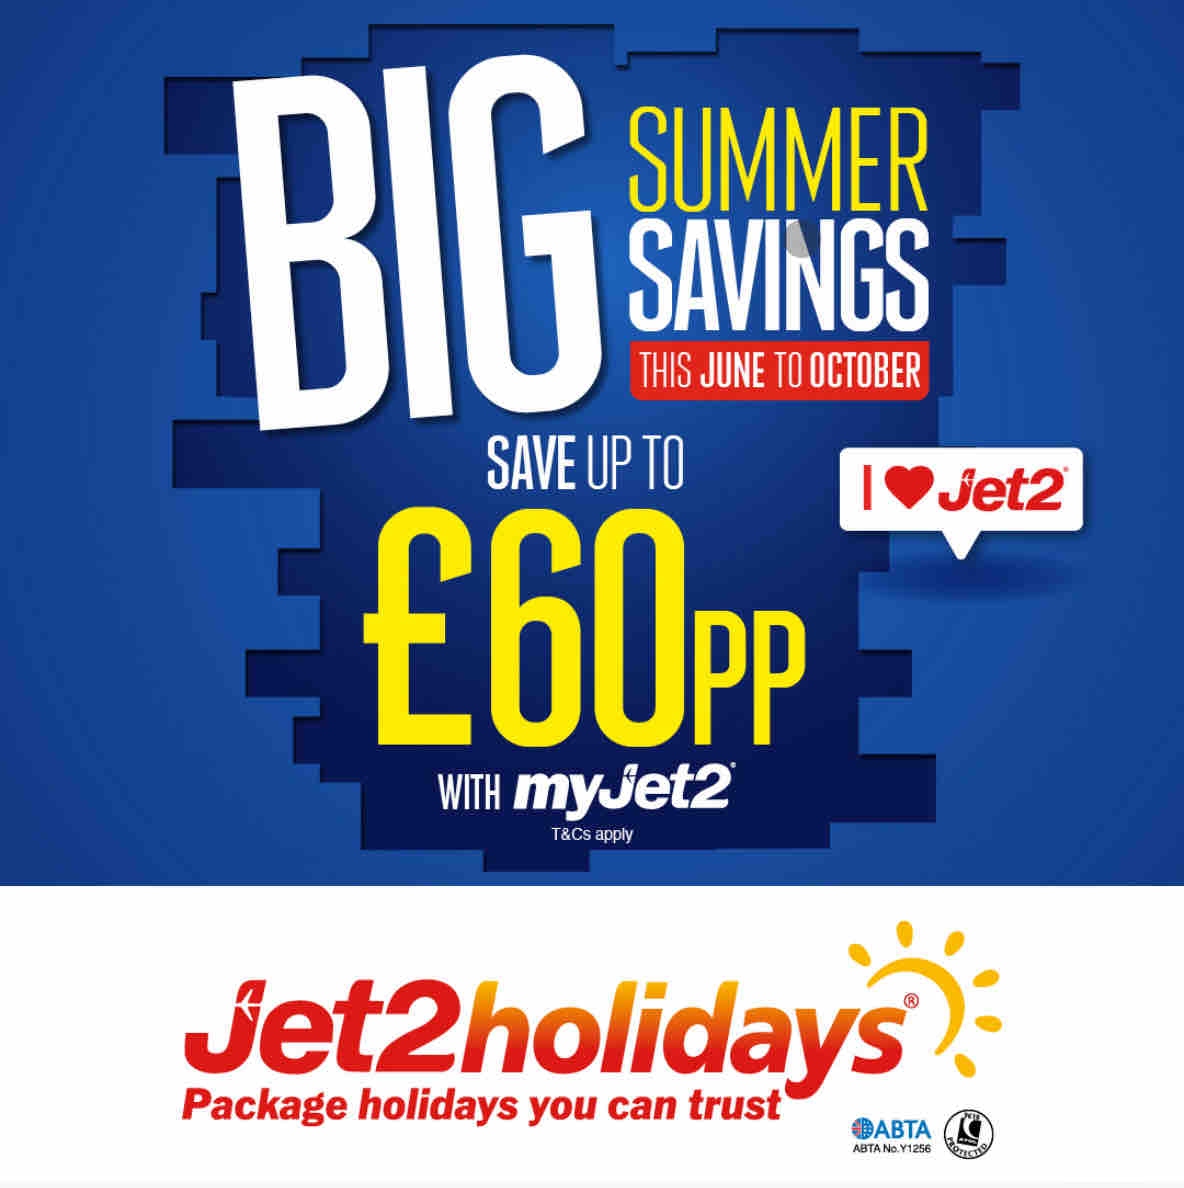 Big summer savings this June to October with Jet2.com and Jet2holidays ✈️☀️ Right now, save up to £60pp with myJet2* Don’t miss out 👉 bit.ly/4aIgrJD *T&Cs apply